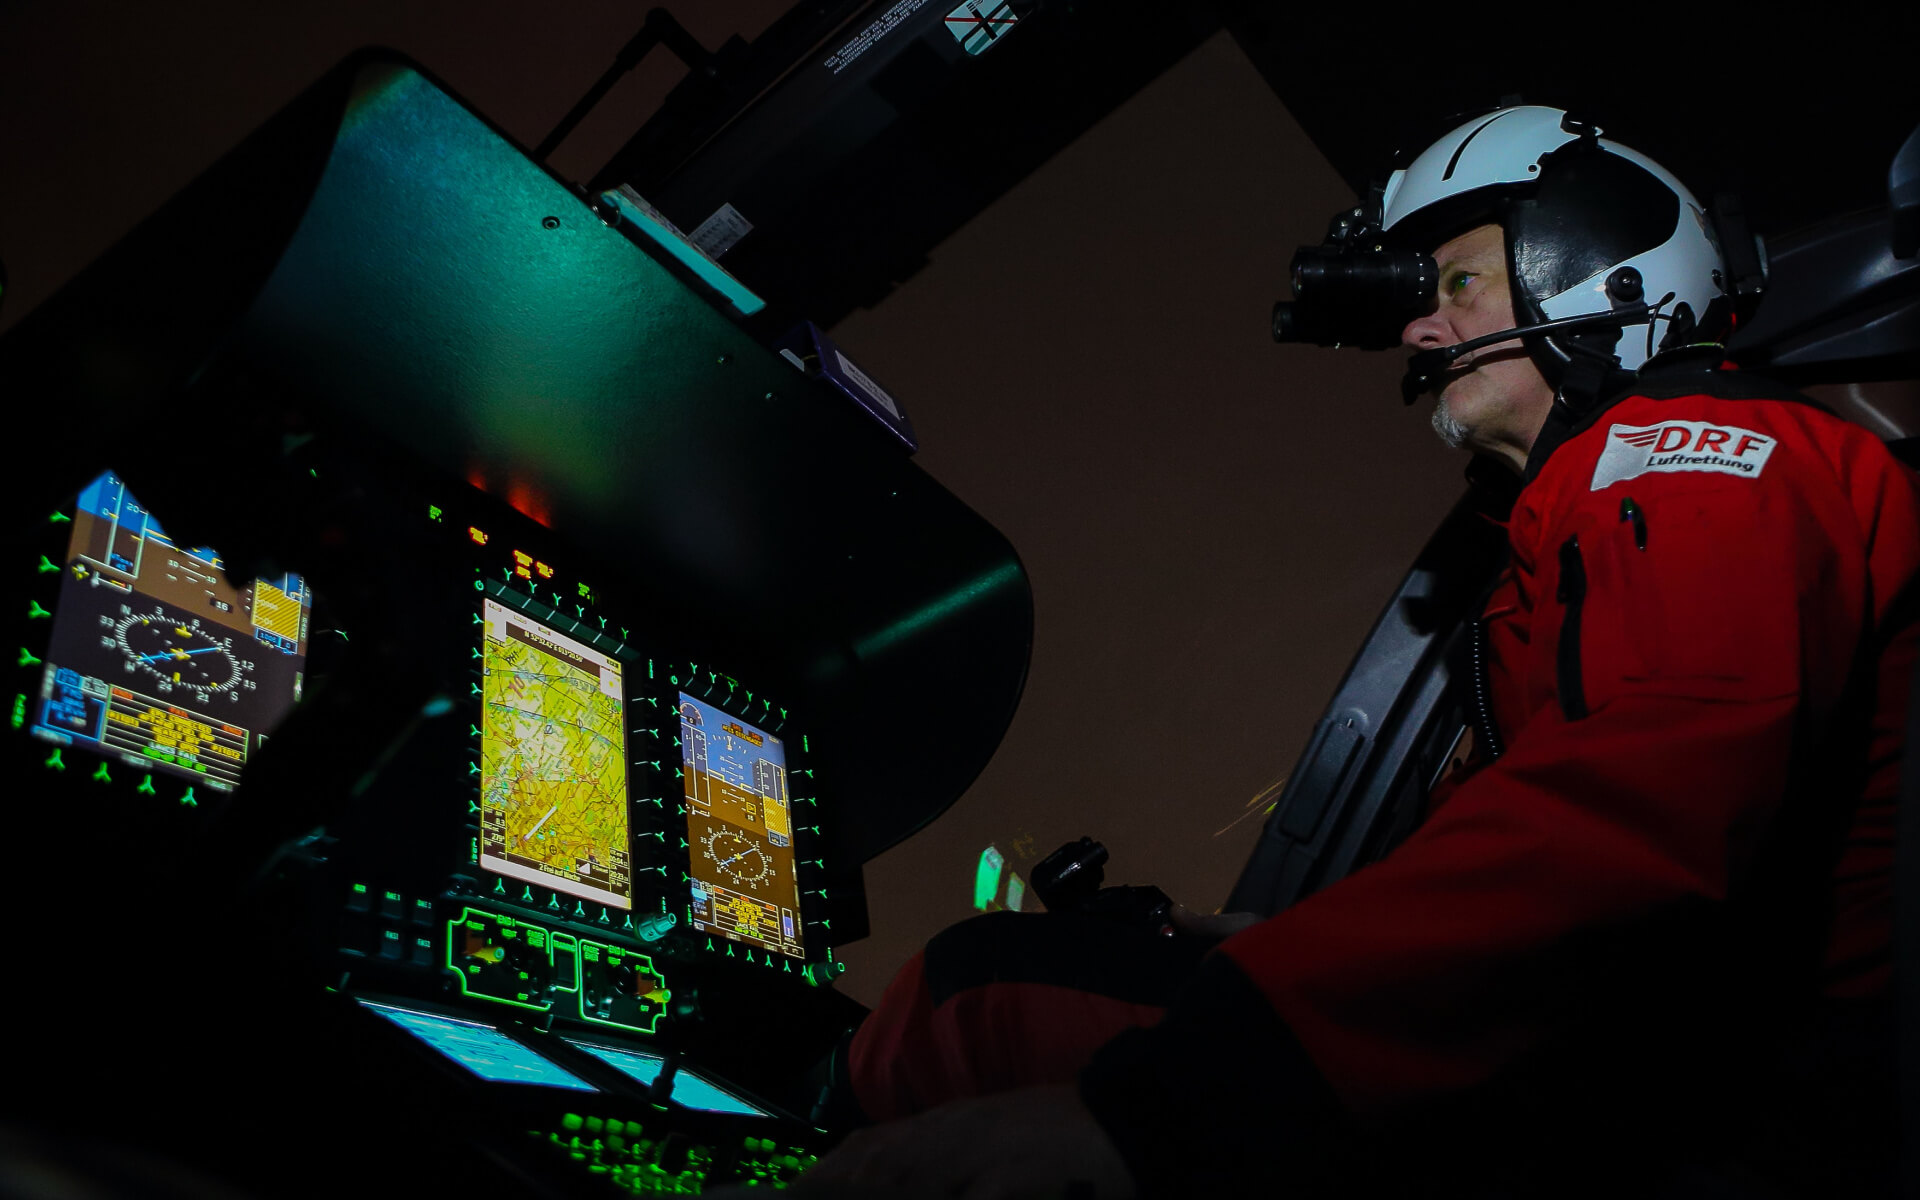 DRF Luftrettung has opened its 10th night flight station nationwide. No other air rescue organization in Germany operates so many 24-hour stations. DRF Luftrettung Photo